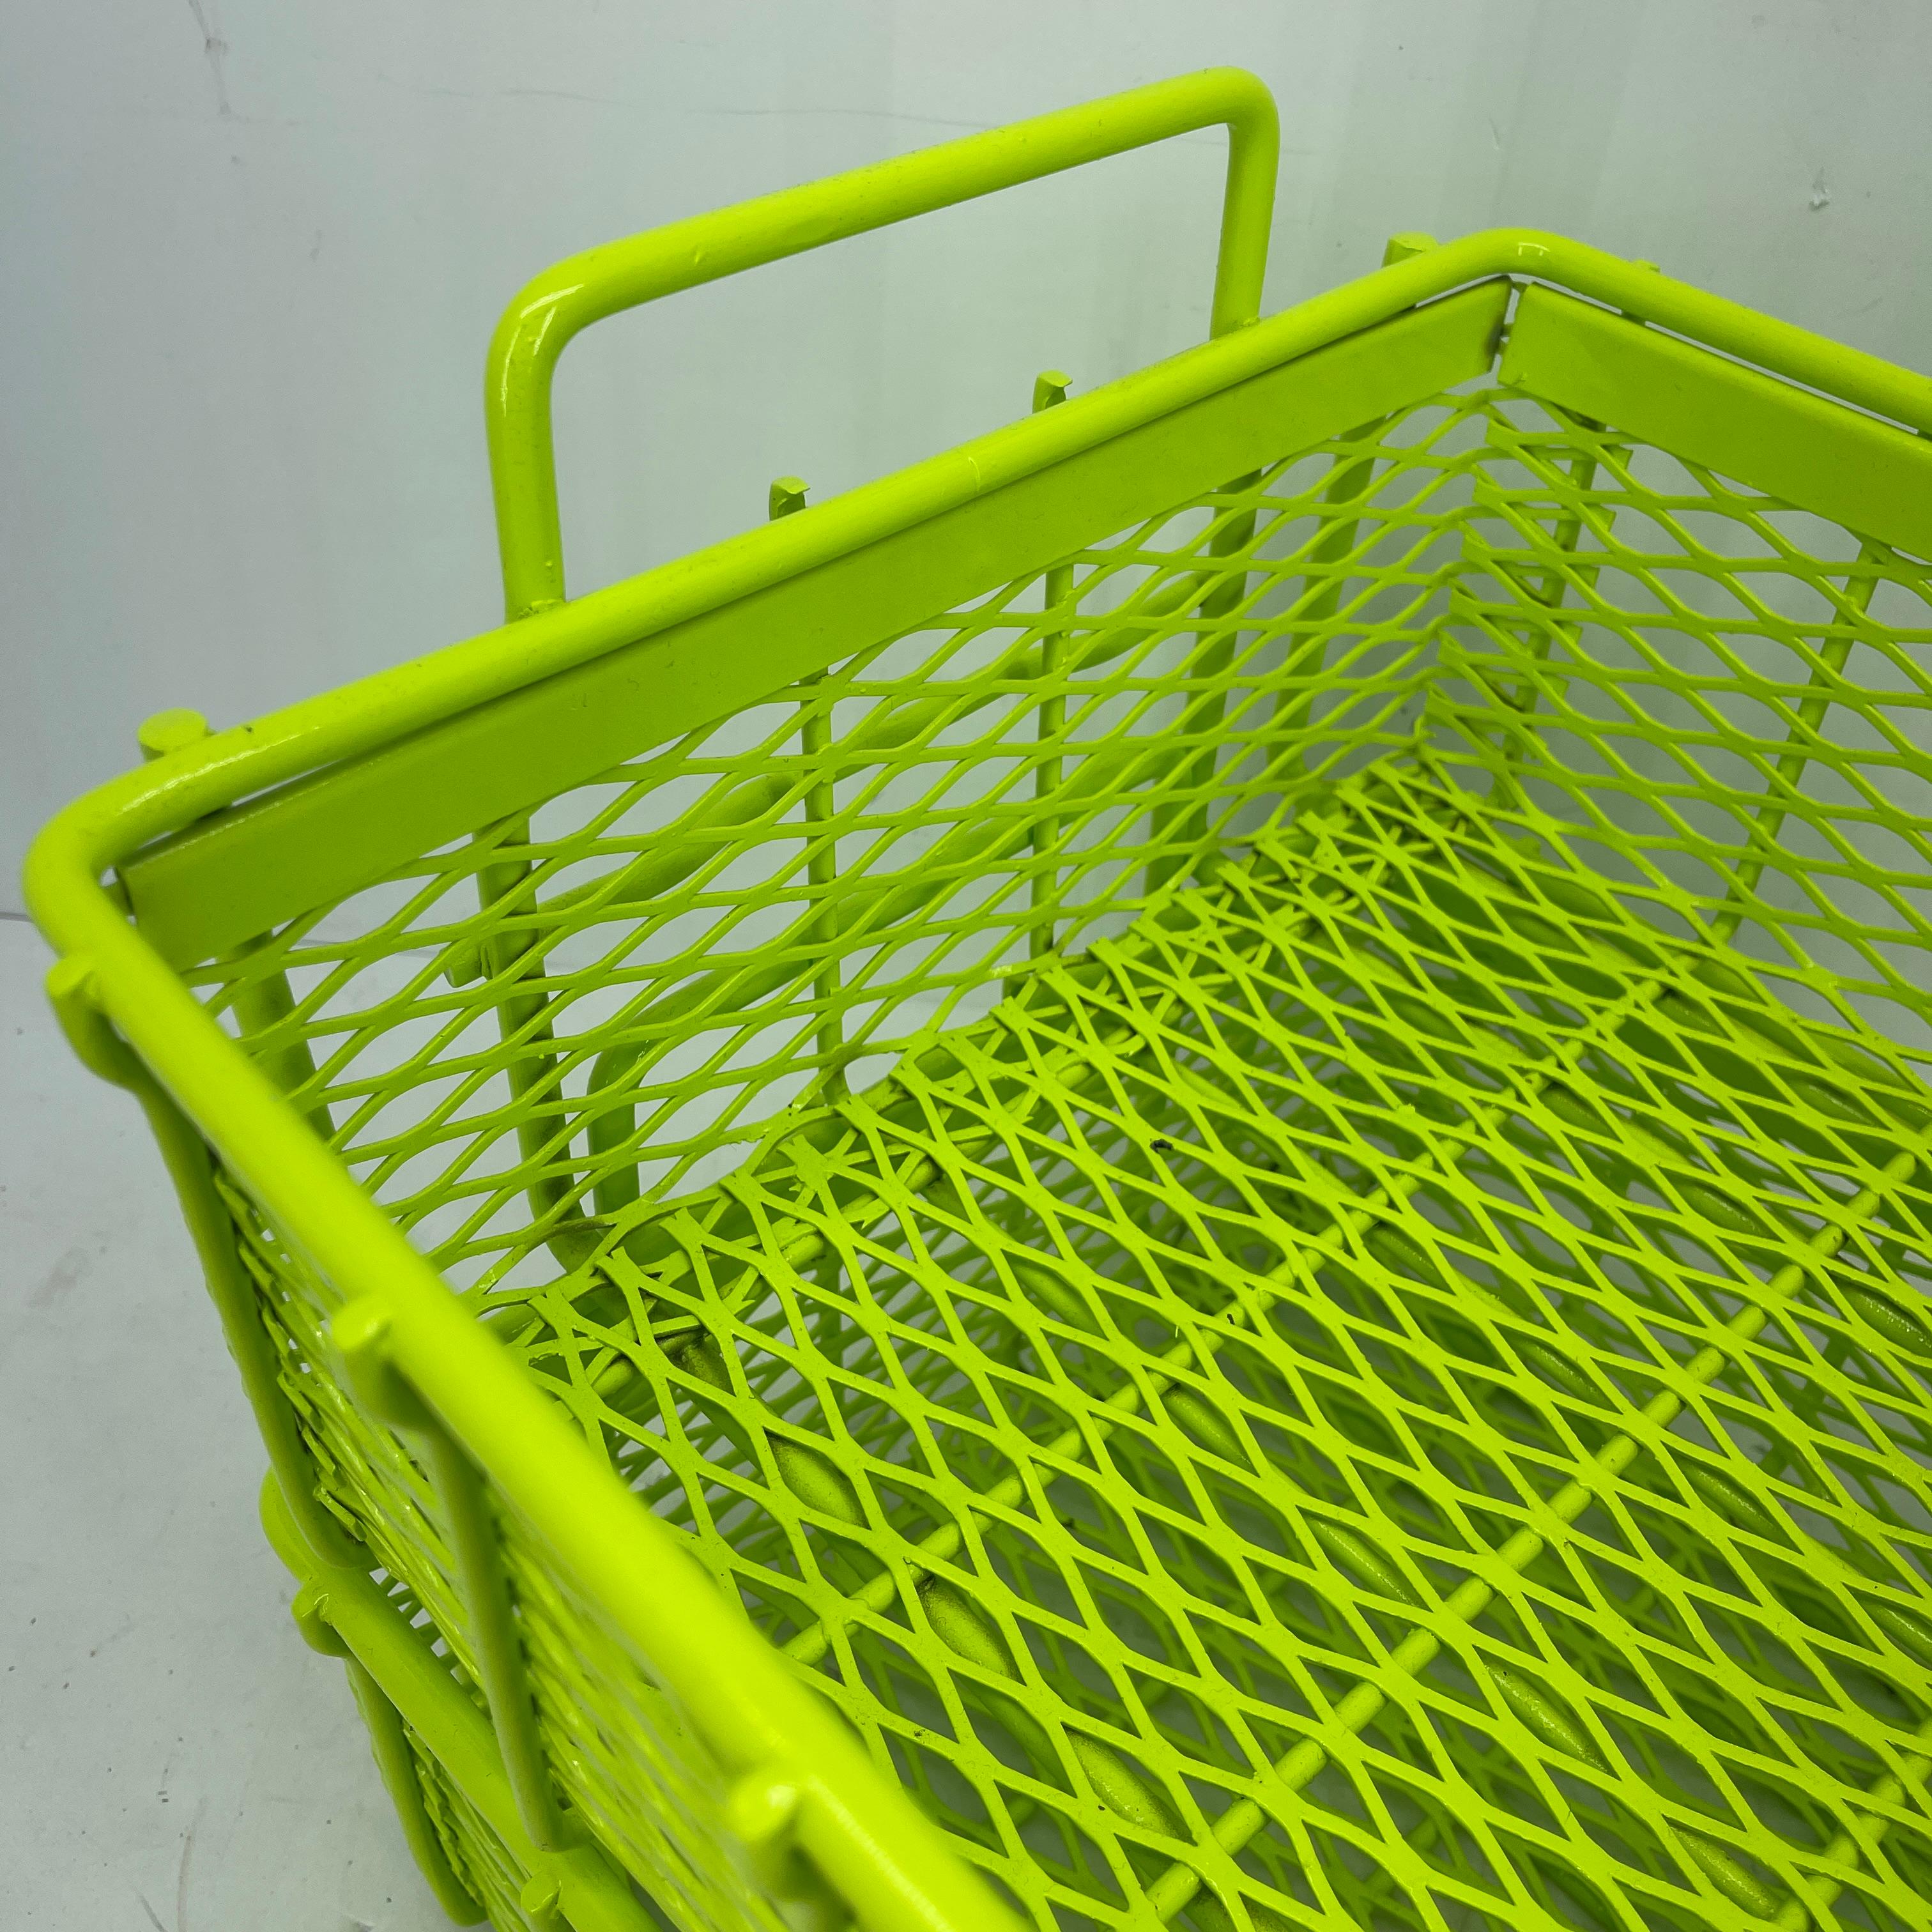 Industrial Era Metal Storage Bins, Powder Coated Bright Chartreuse In Good Condition For Sale In Haddonfield, NJ